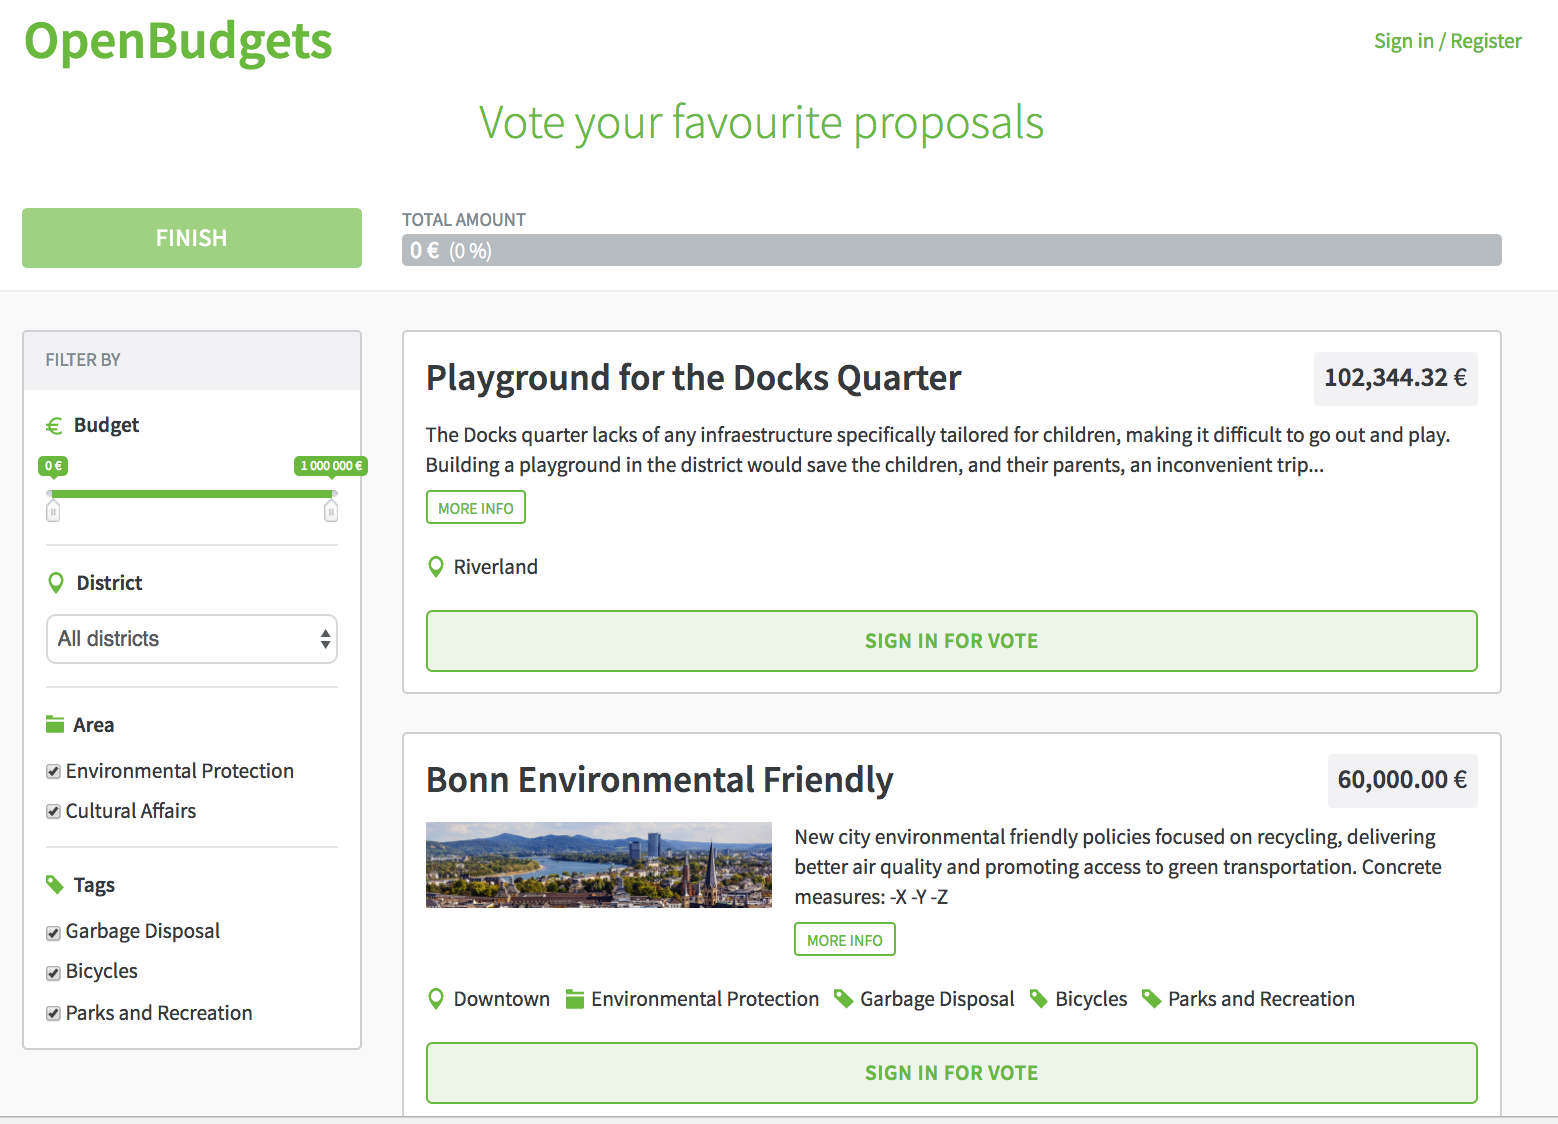 Citizens vote for their favorite budgeting proposals.